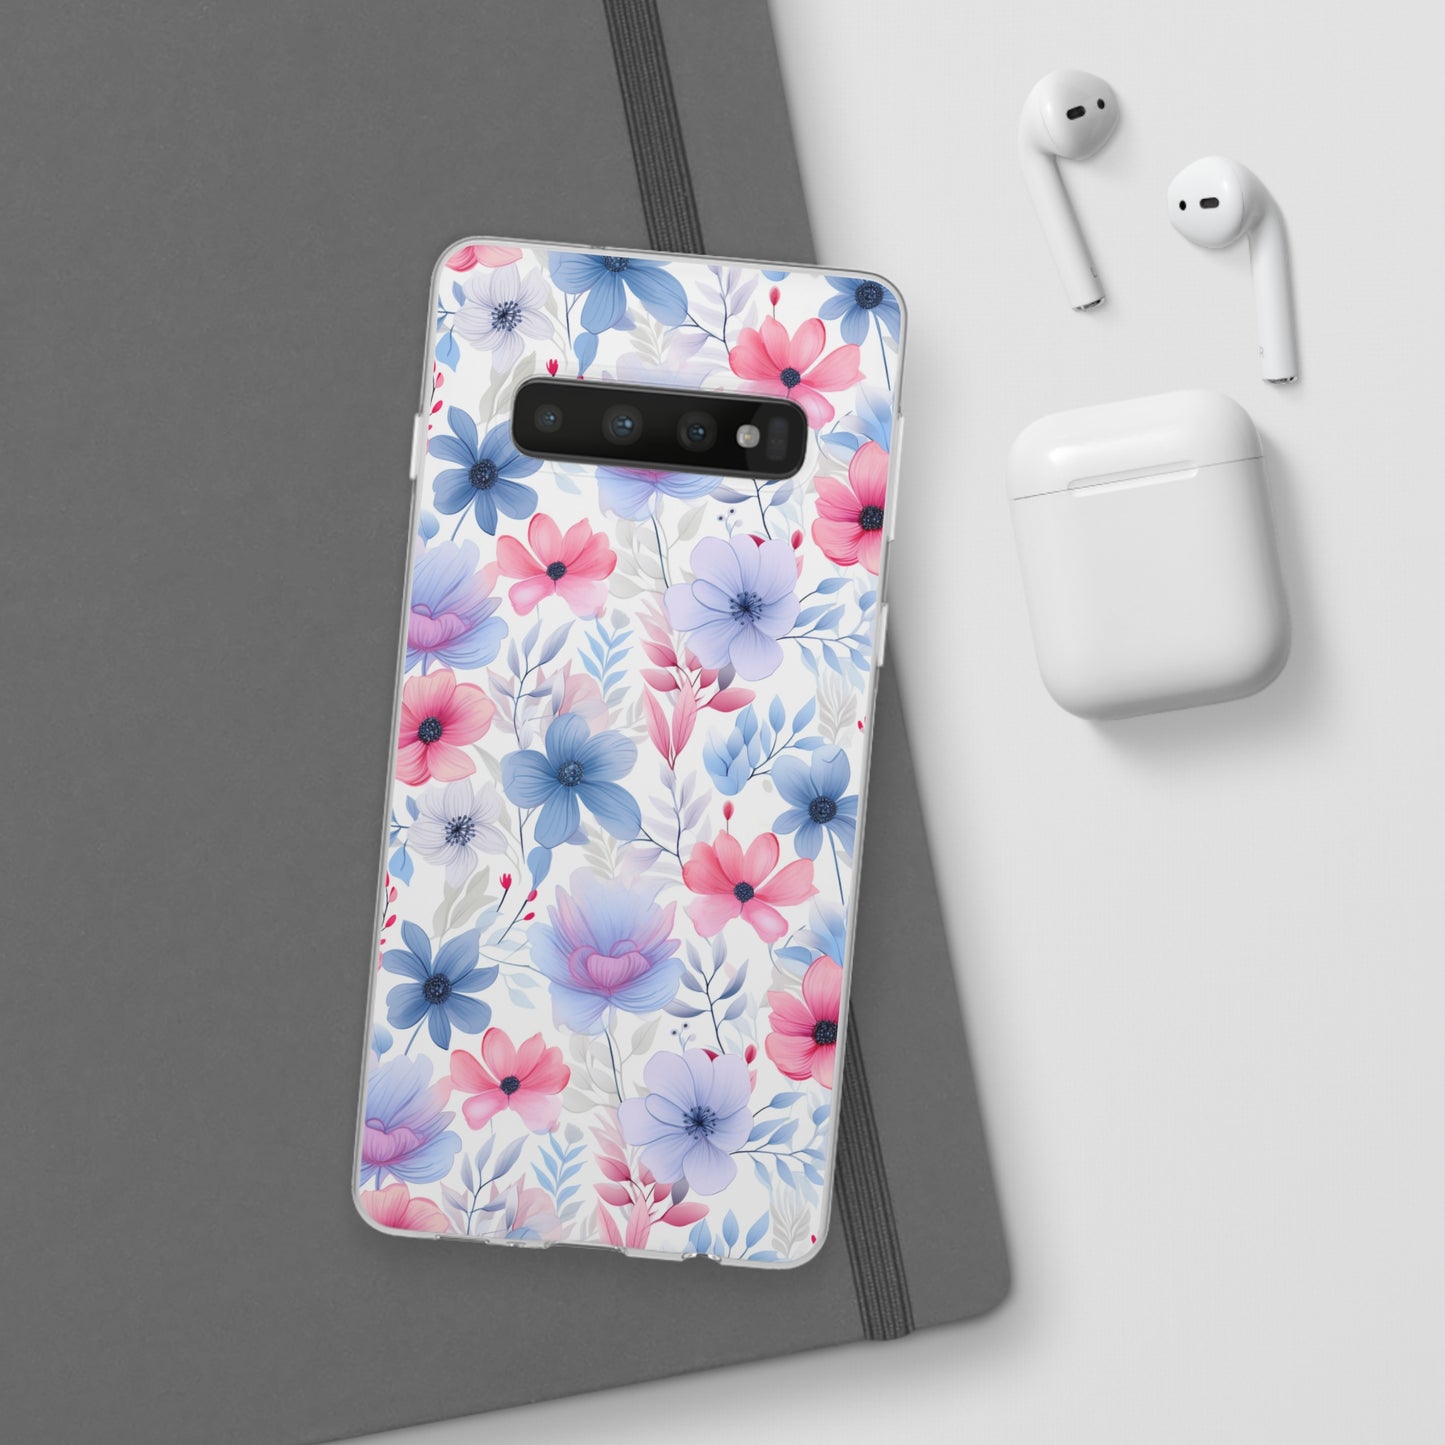 Floral Whispers - Soft Hues of Violets, Pinks, and Blues - Flexi Phone Case Phone Case Pattern Symphony Samsung Galaxy S10  